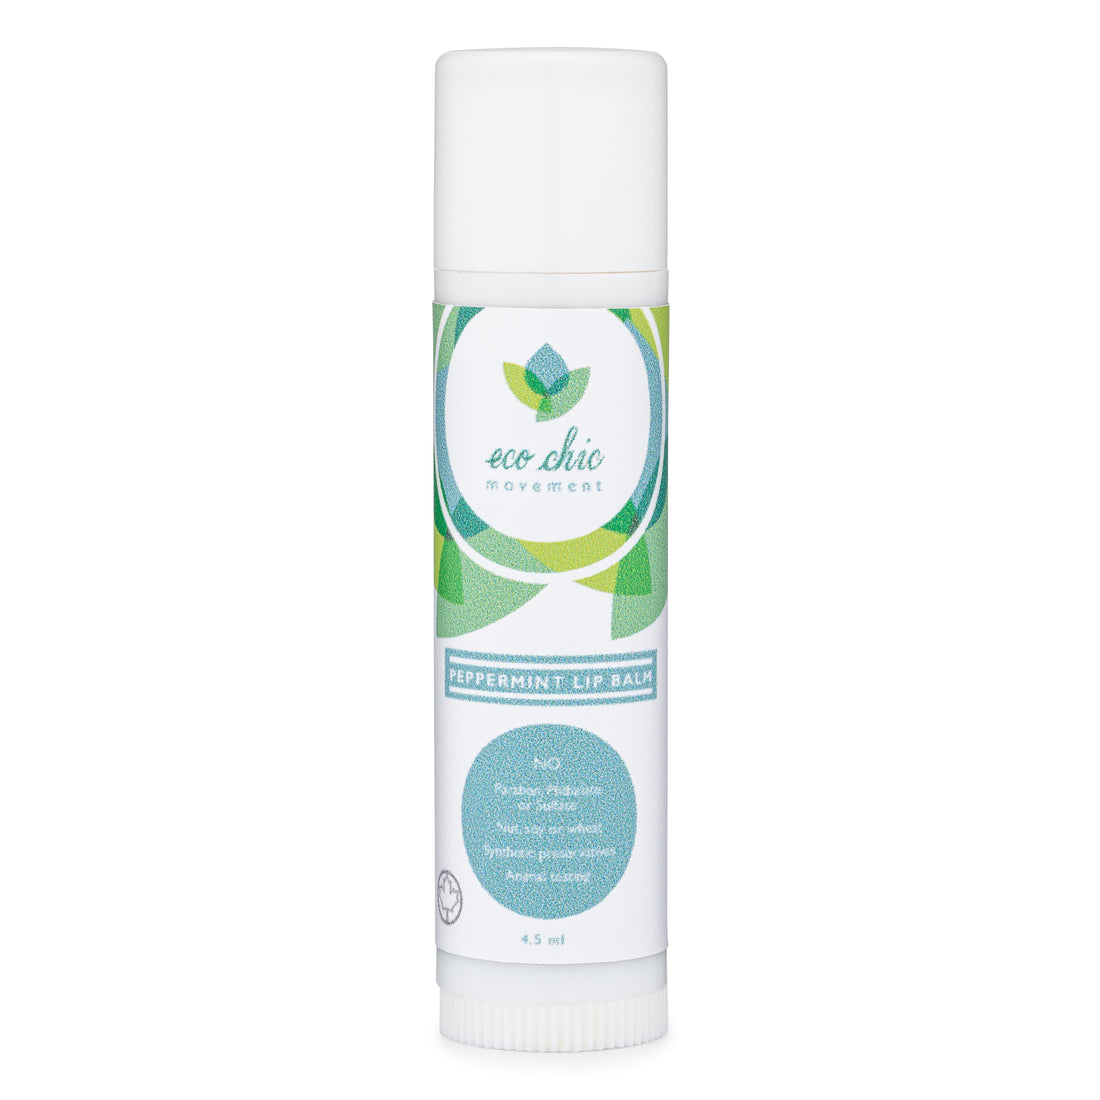 A tube of peppermint scented non toxic lip balm from Eco Chic Movement